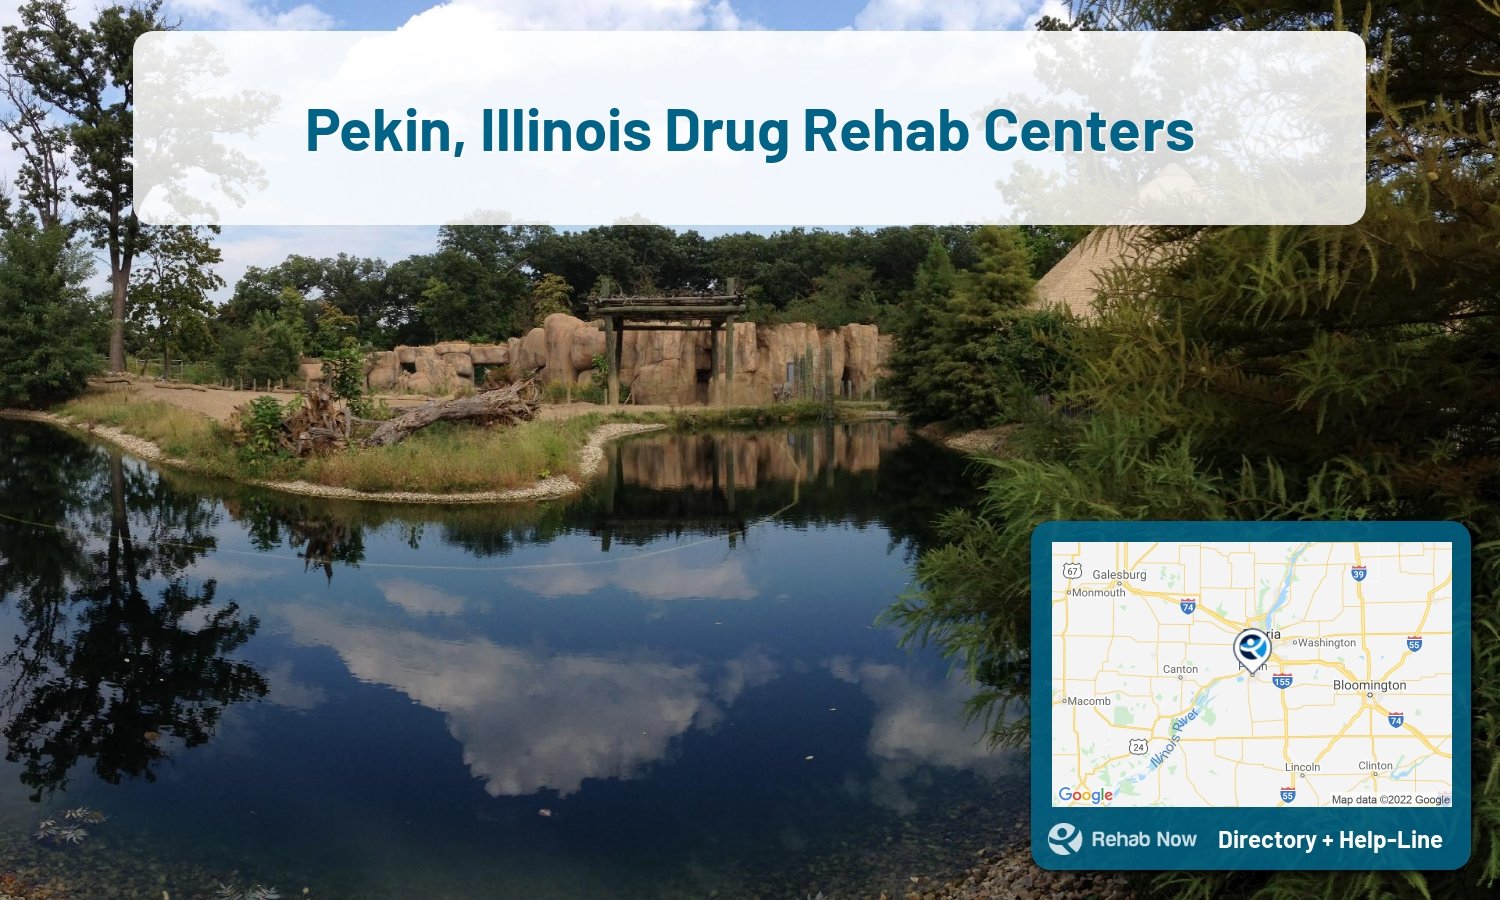 Pekin, IL Treatment Centers. Find drug rehab in Pekin, Illinois, or detox and treatment programs. Get the right help now!